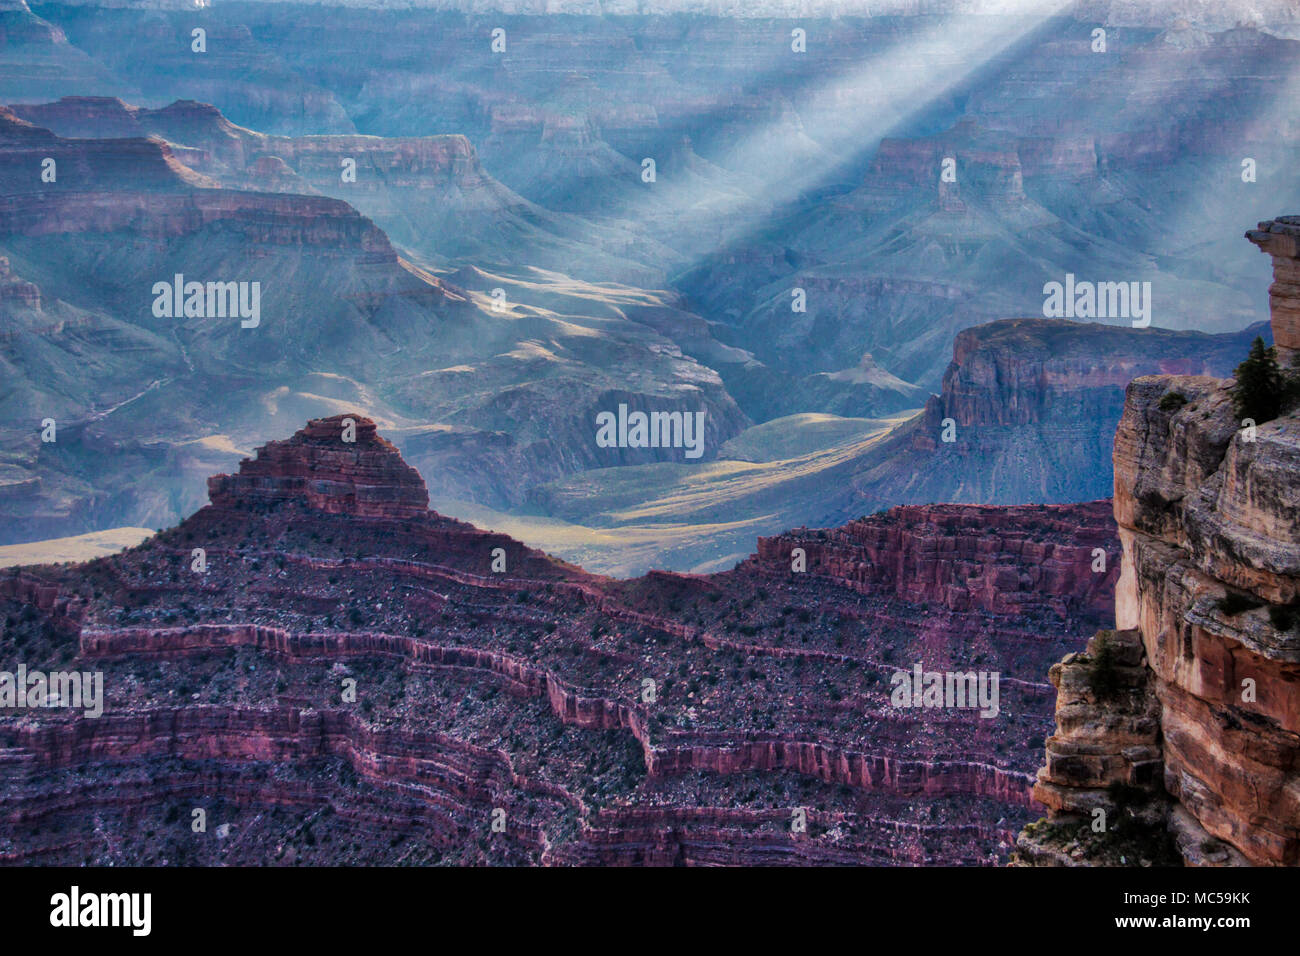 Sunrise on the South Rim of the Grand Canyon National Park in Arizona. Grand Canyon is a geological wonder, with rock layers as "windows into time" Stock Photo